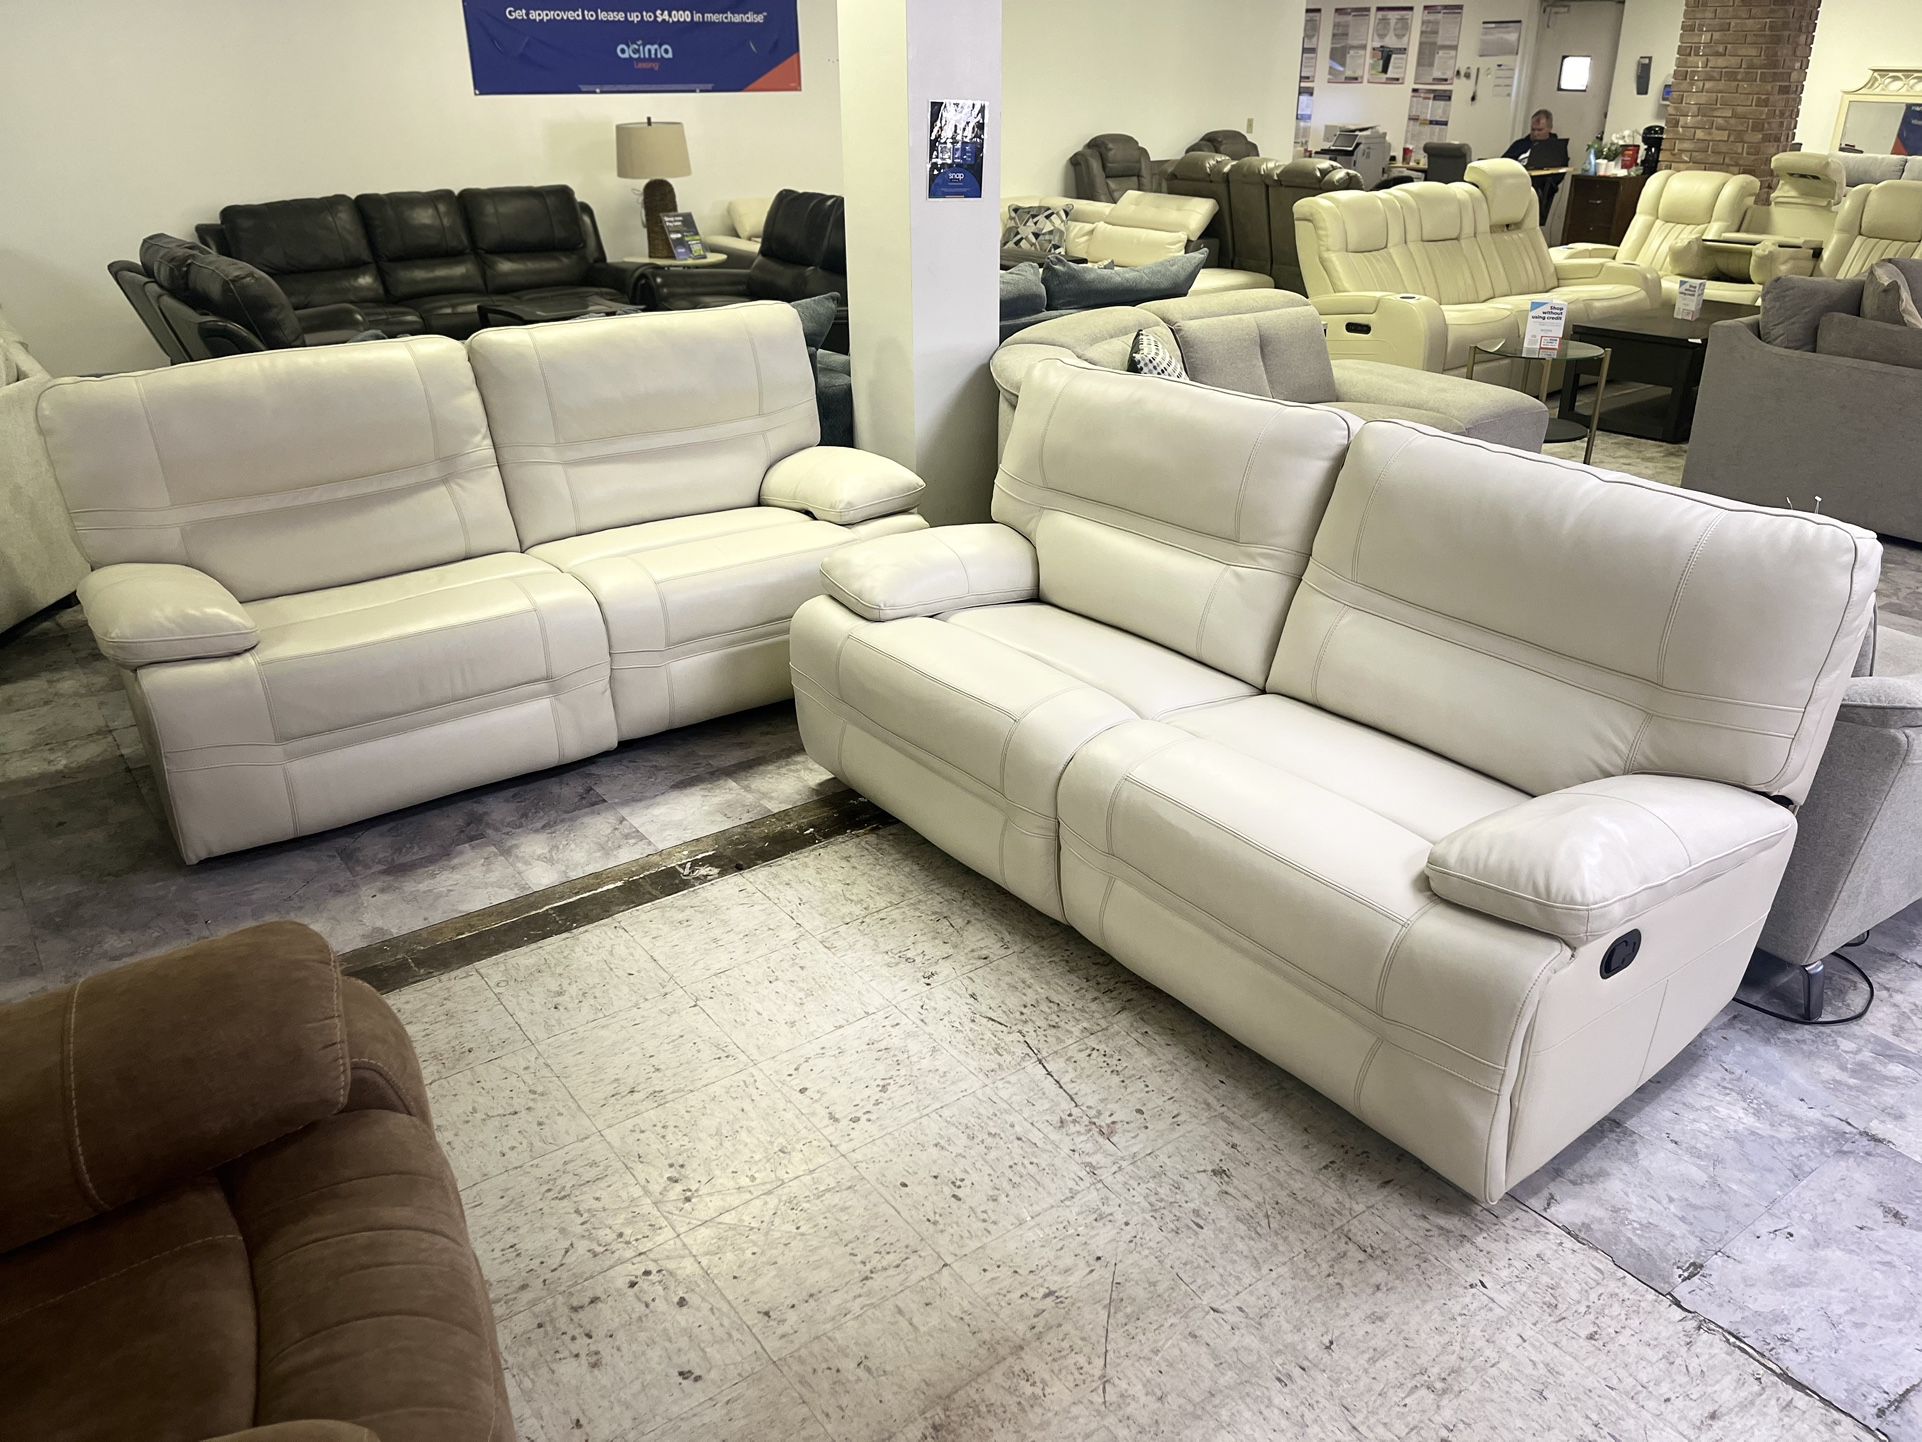 Two White Leather Loveseats - Deep Seat - We Deliver & Finance 🚚🔥🎄🎄💸